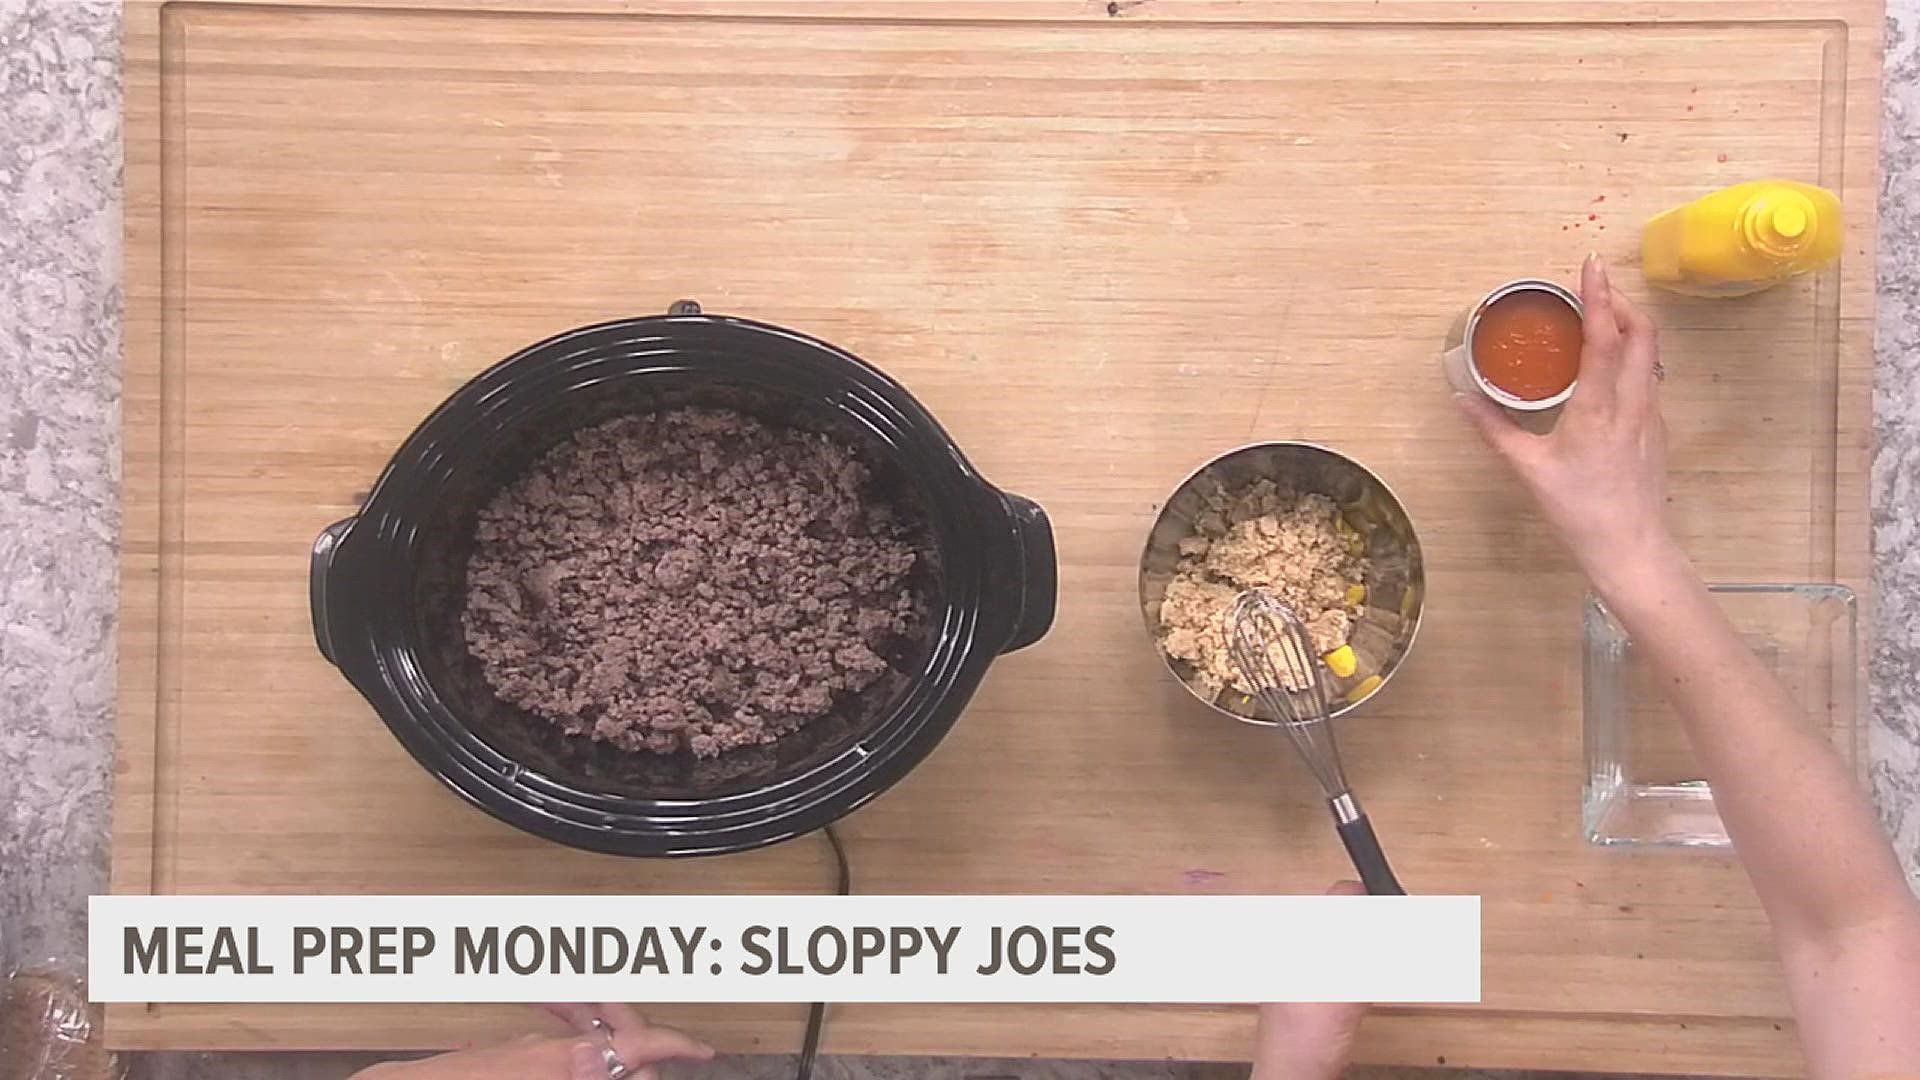 An easy way to make Sloppy Joes, especially if you're busy around meal time.